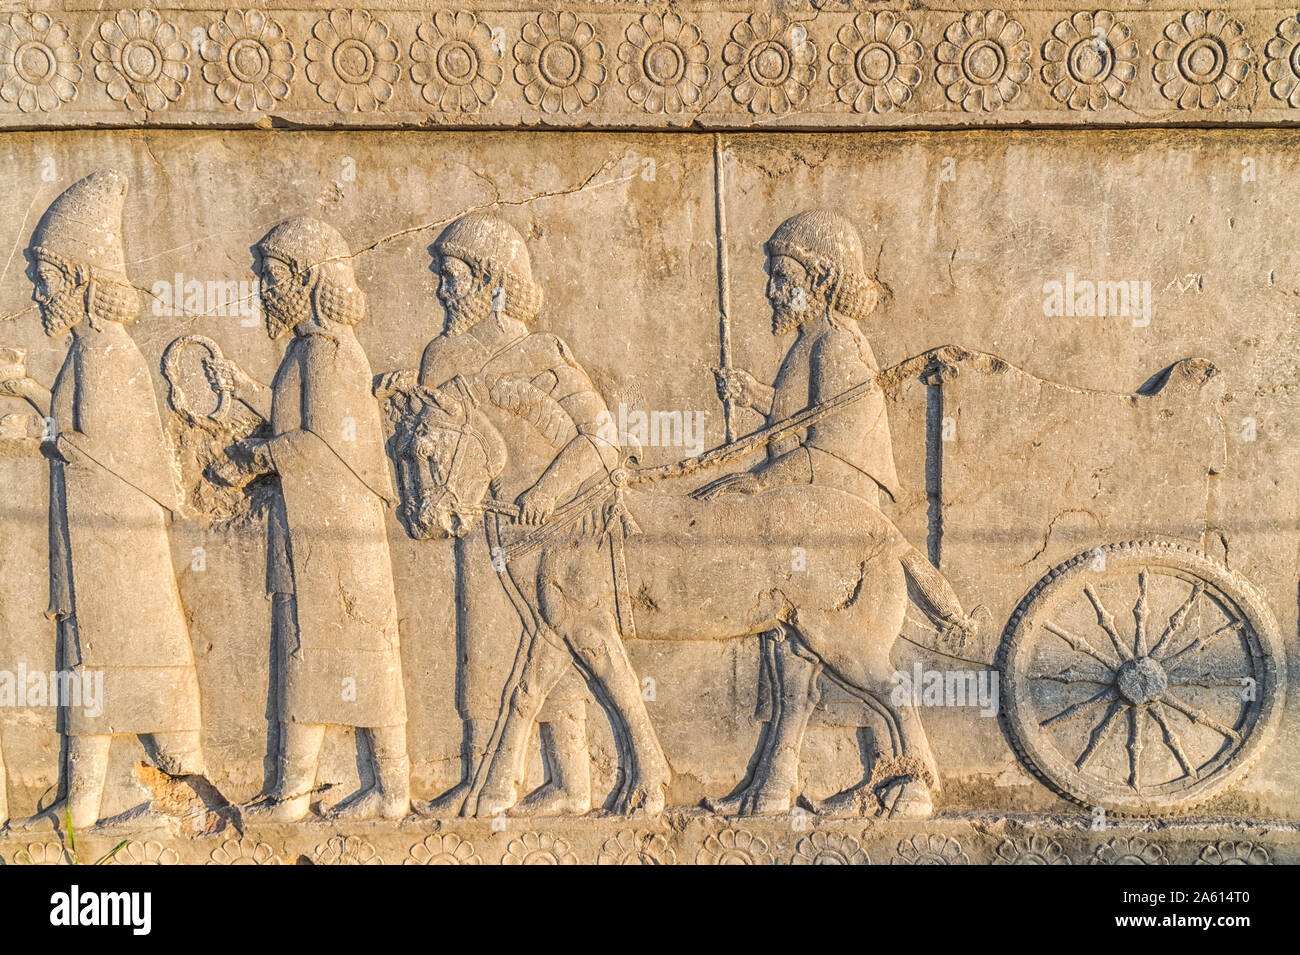 Apadana stairway facade, relief of the Achaemenids, Medes and Persians, Persepolis, UNESCO, Fars Province, Islamic Republic of Iran, Middle East Stock Photo